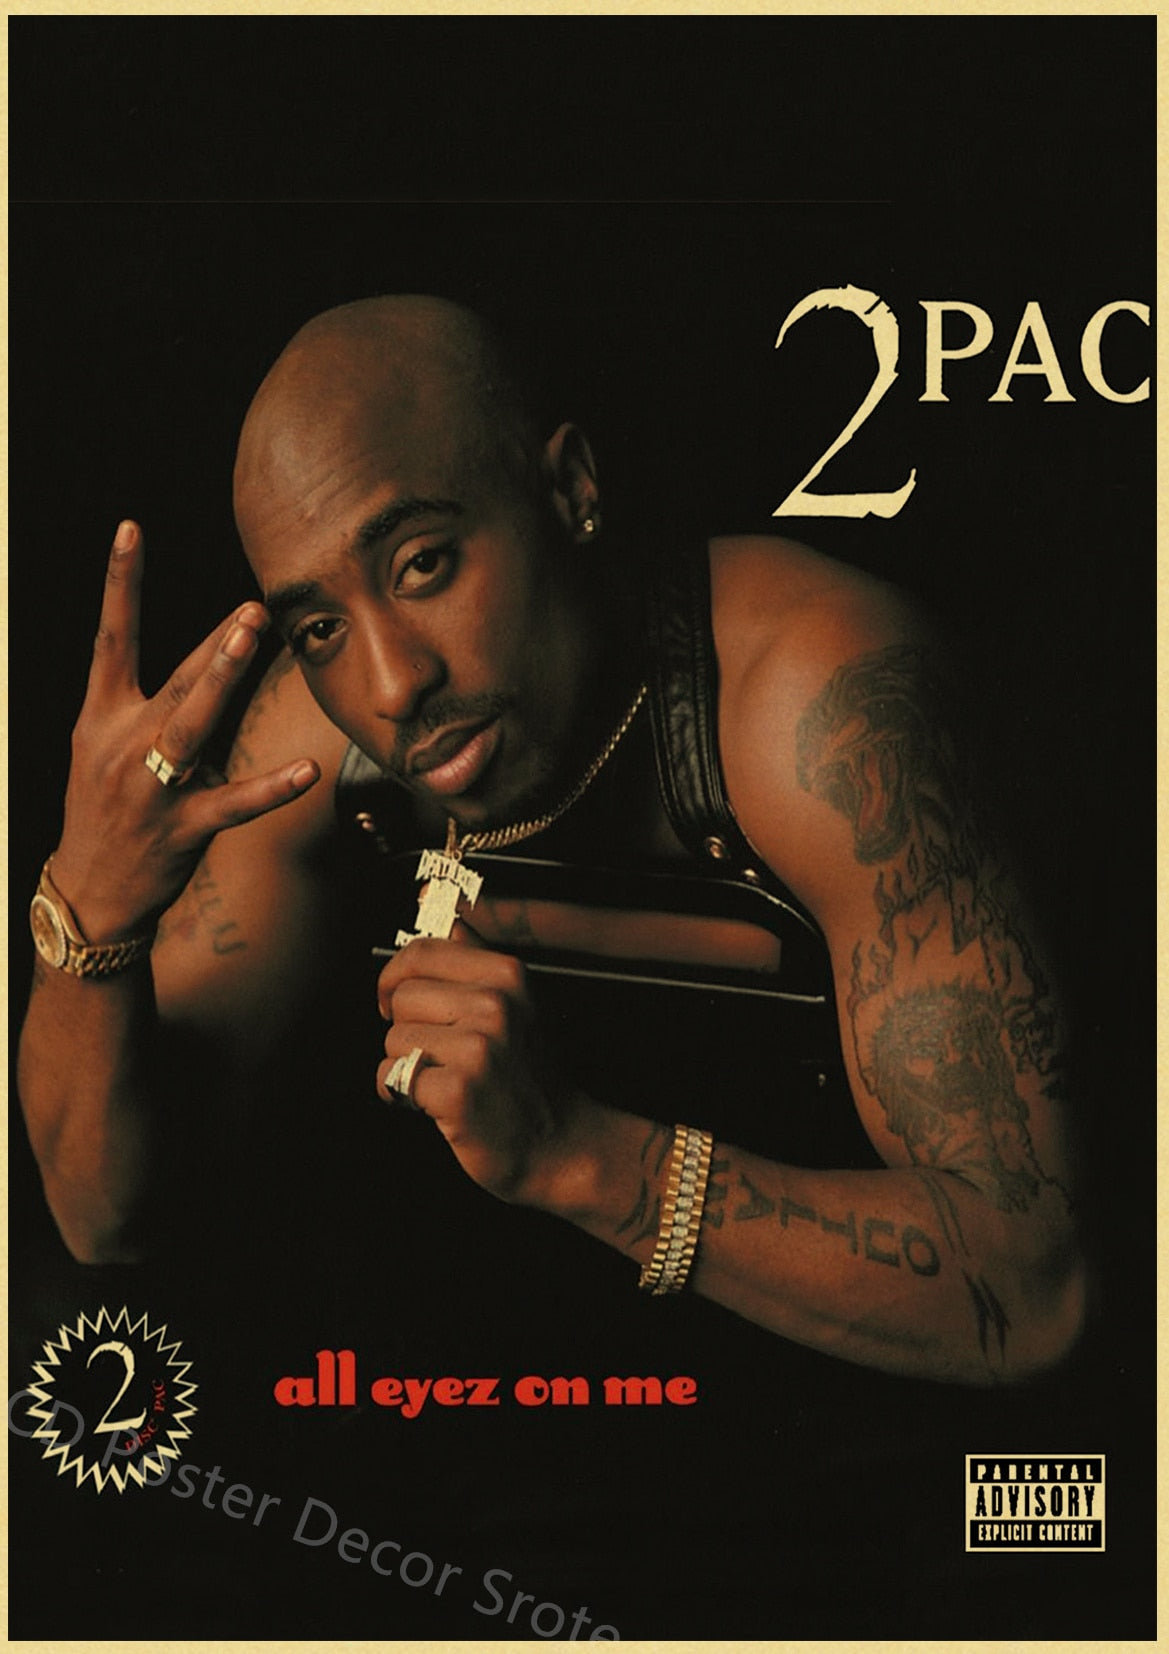 Hip Hop Singer Tupac Retro Poster Kraft Paper 2PAC Prints Posters Vintage Home Room Bar Cafe Decor Aesthetic Art Wall Paintings